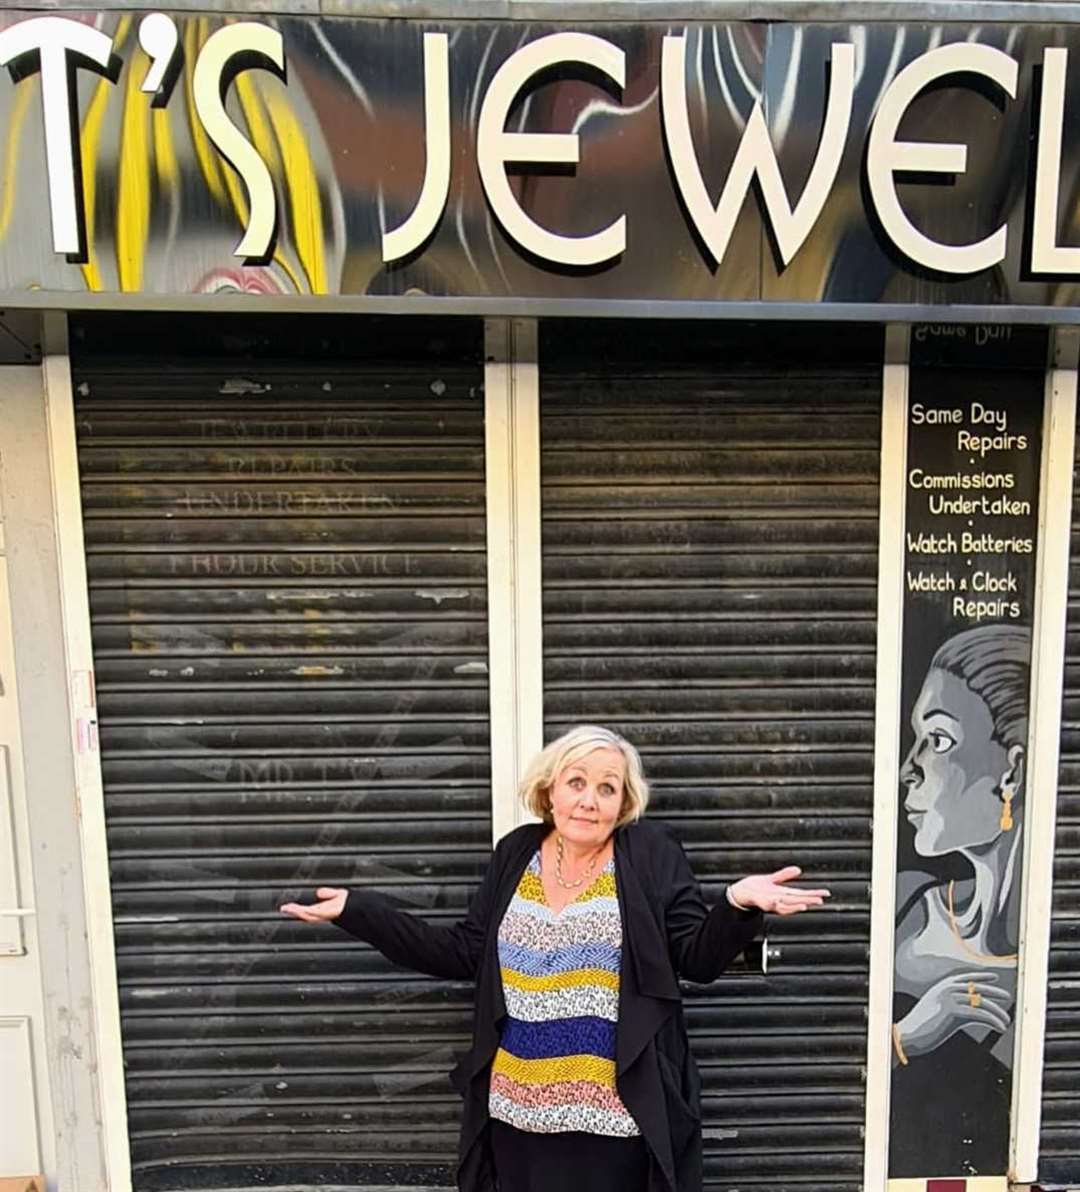 Mr T's Jewellers owner Lisa Townend, 55, has slammed the decision